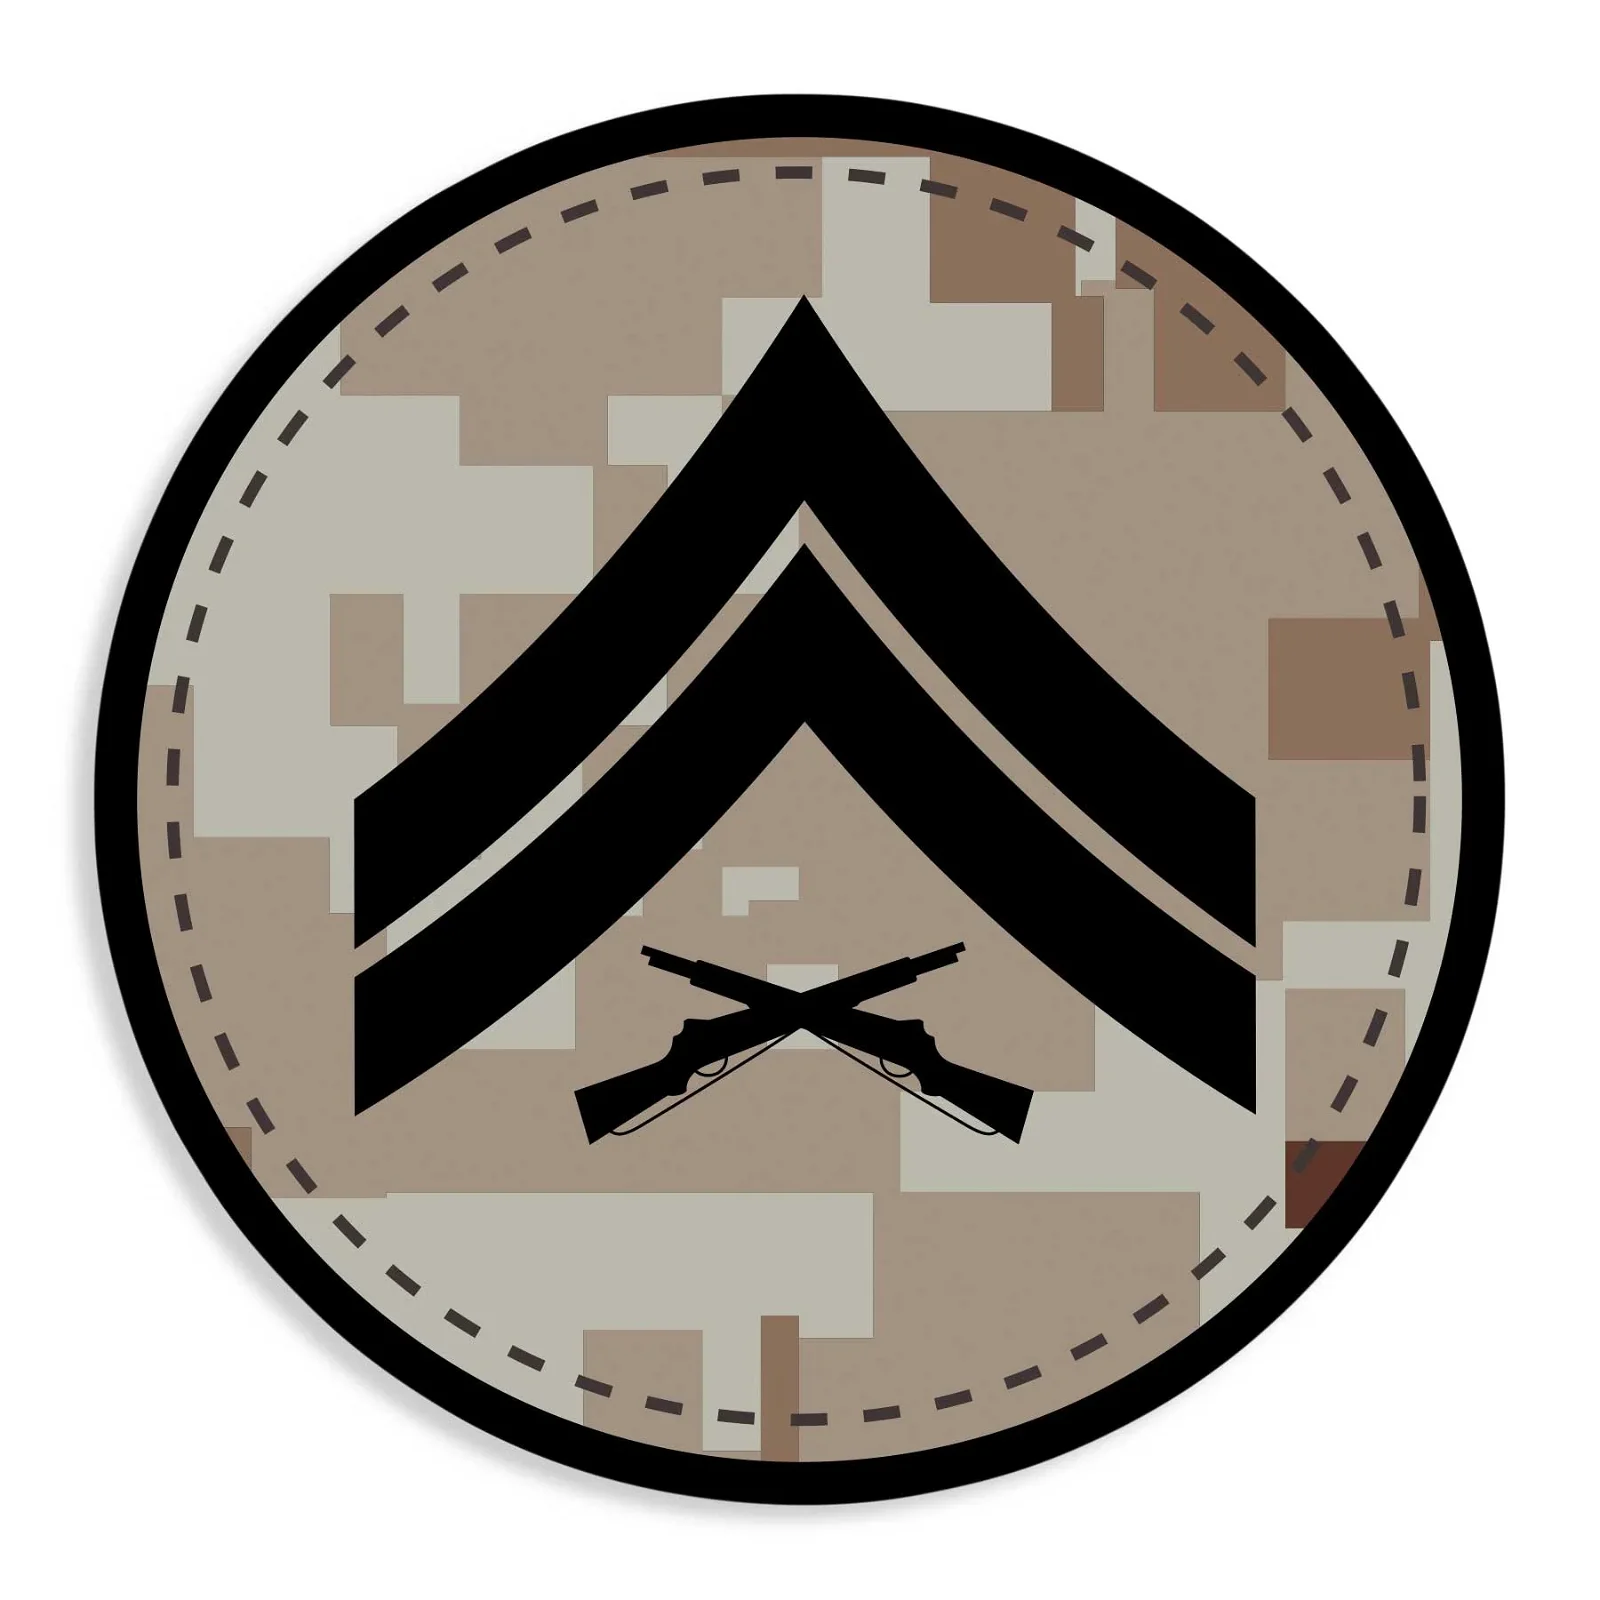 Image of Choose Your Rank Decals in Desert or Woodland